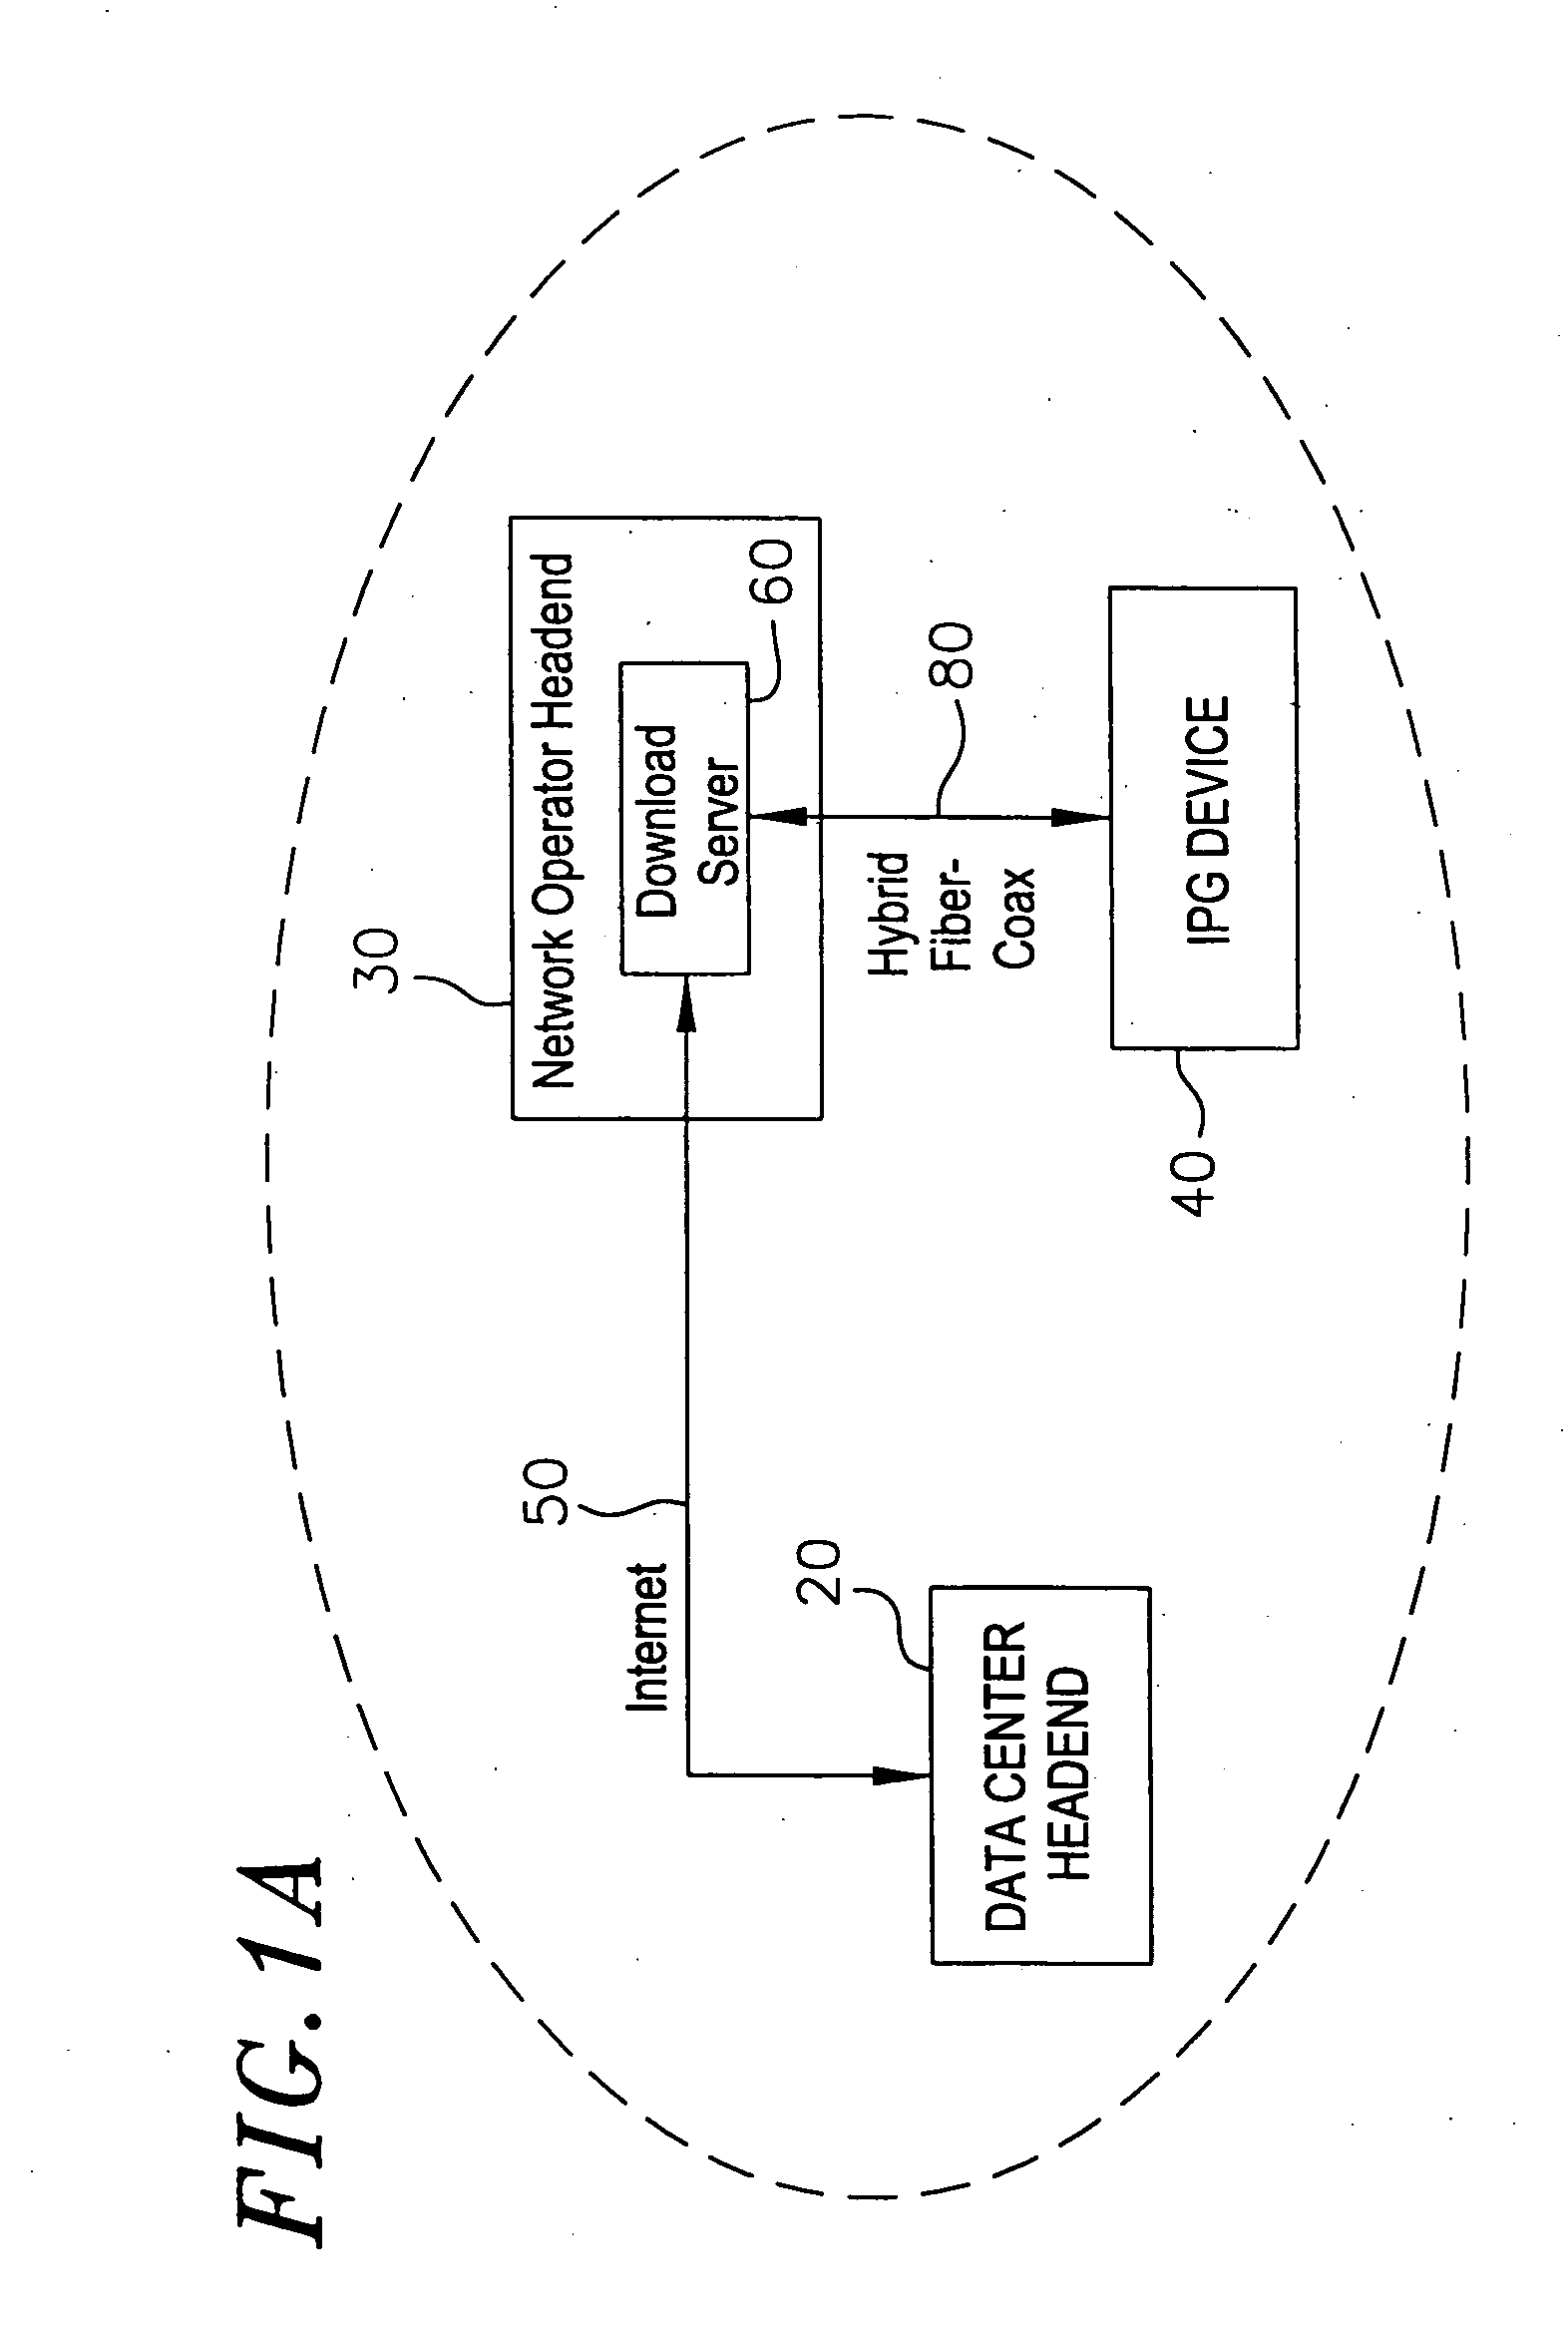 Multiple interactive electronic program guide system and methods